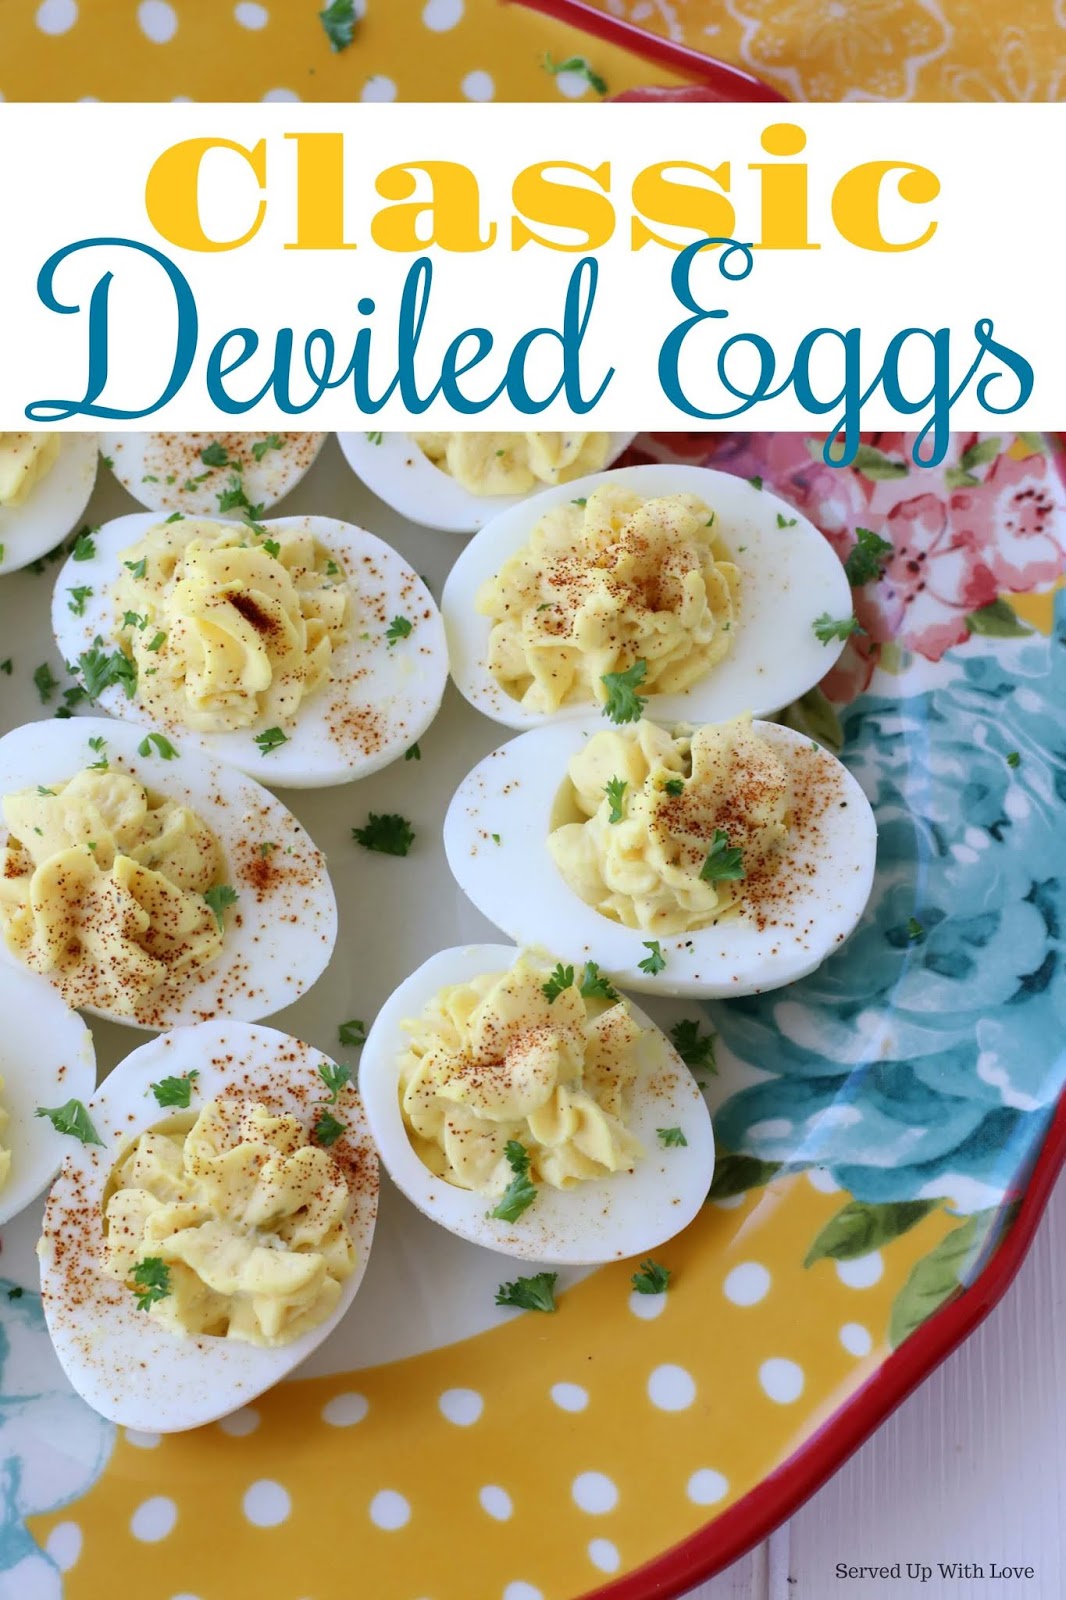 Served Up With Love: Classic Deviled Eggs